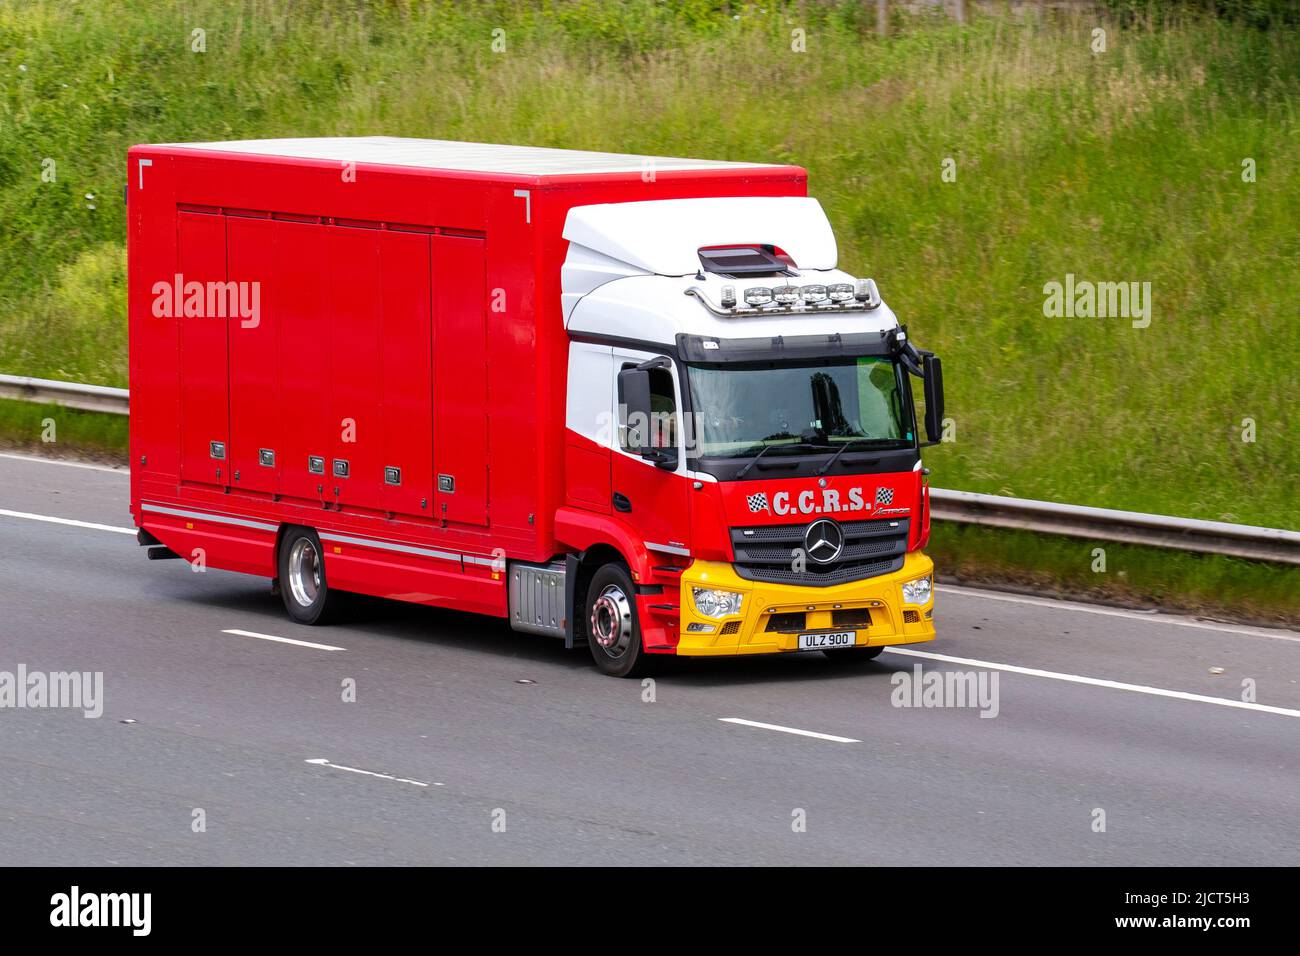 C.C.R.S 2019 Mercedes Benz 1824L 7698cc automatic C.C.R.S. Rescue & Recovery recovery operators based in Northern Ireland; driving on the M6 Motorway, UK Stock Photo